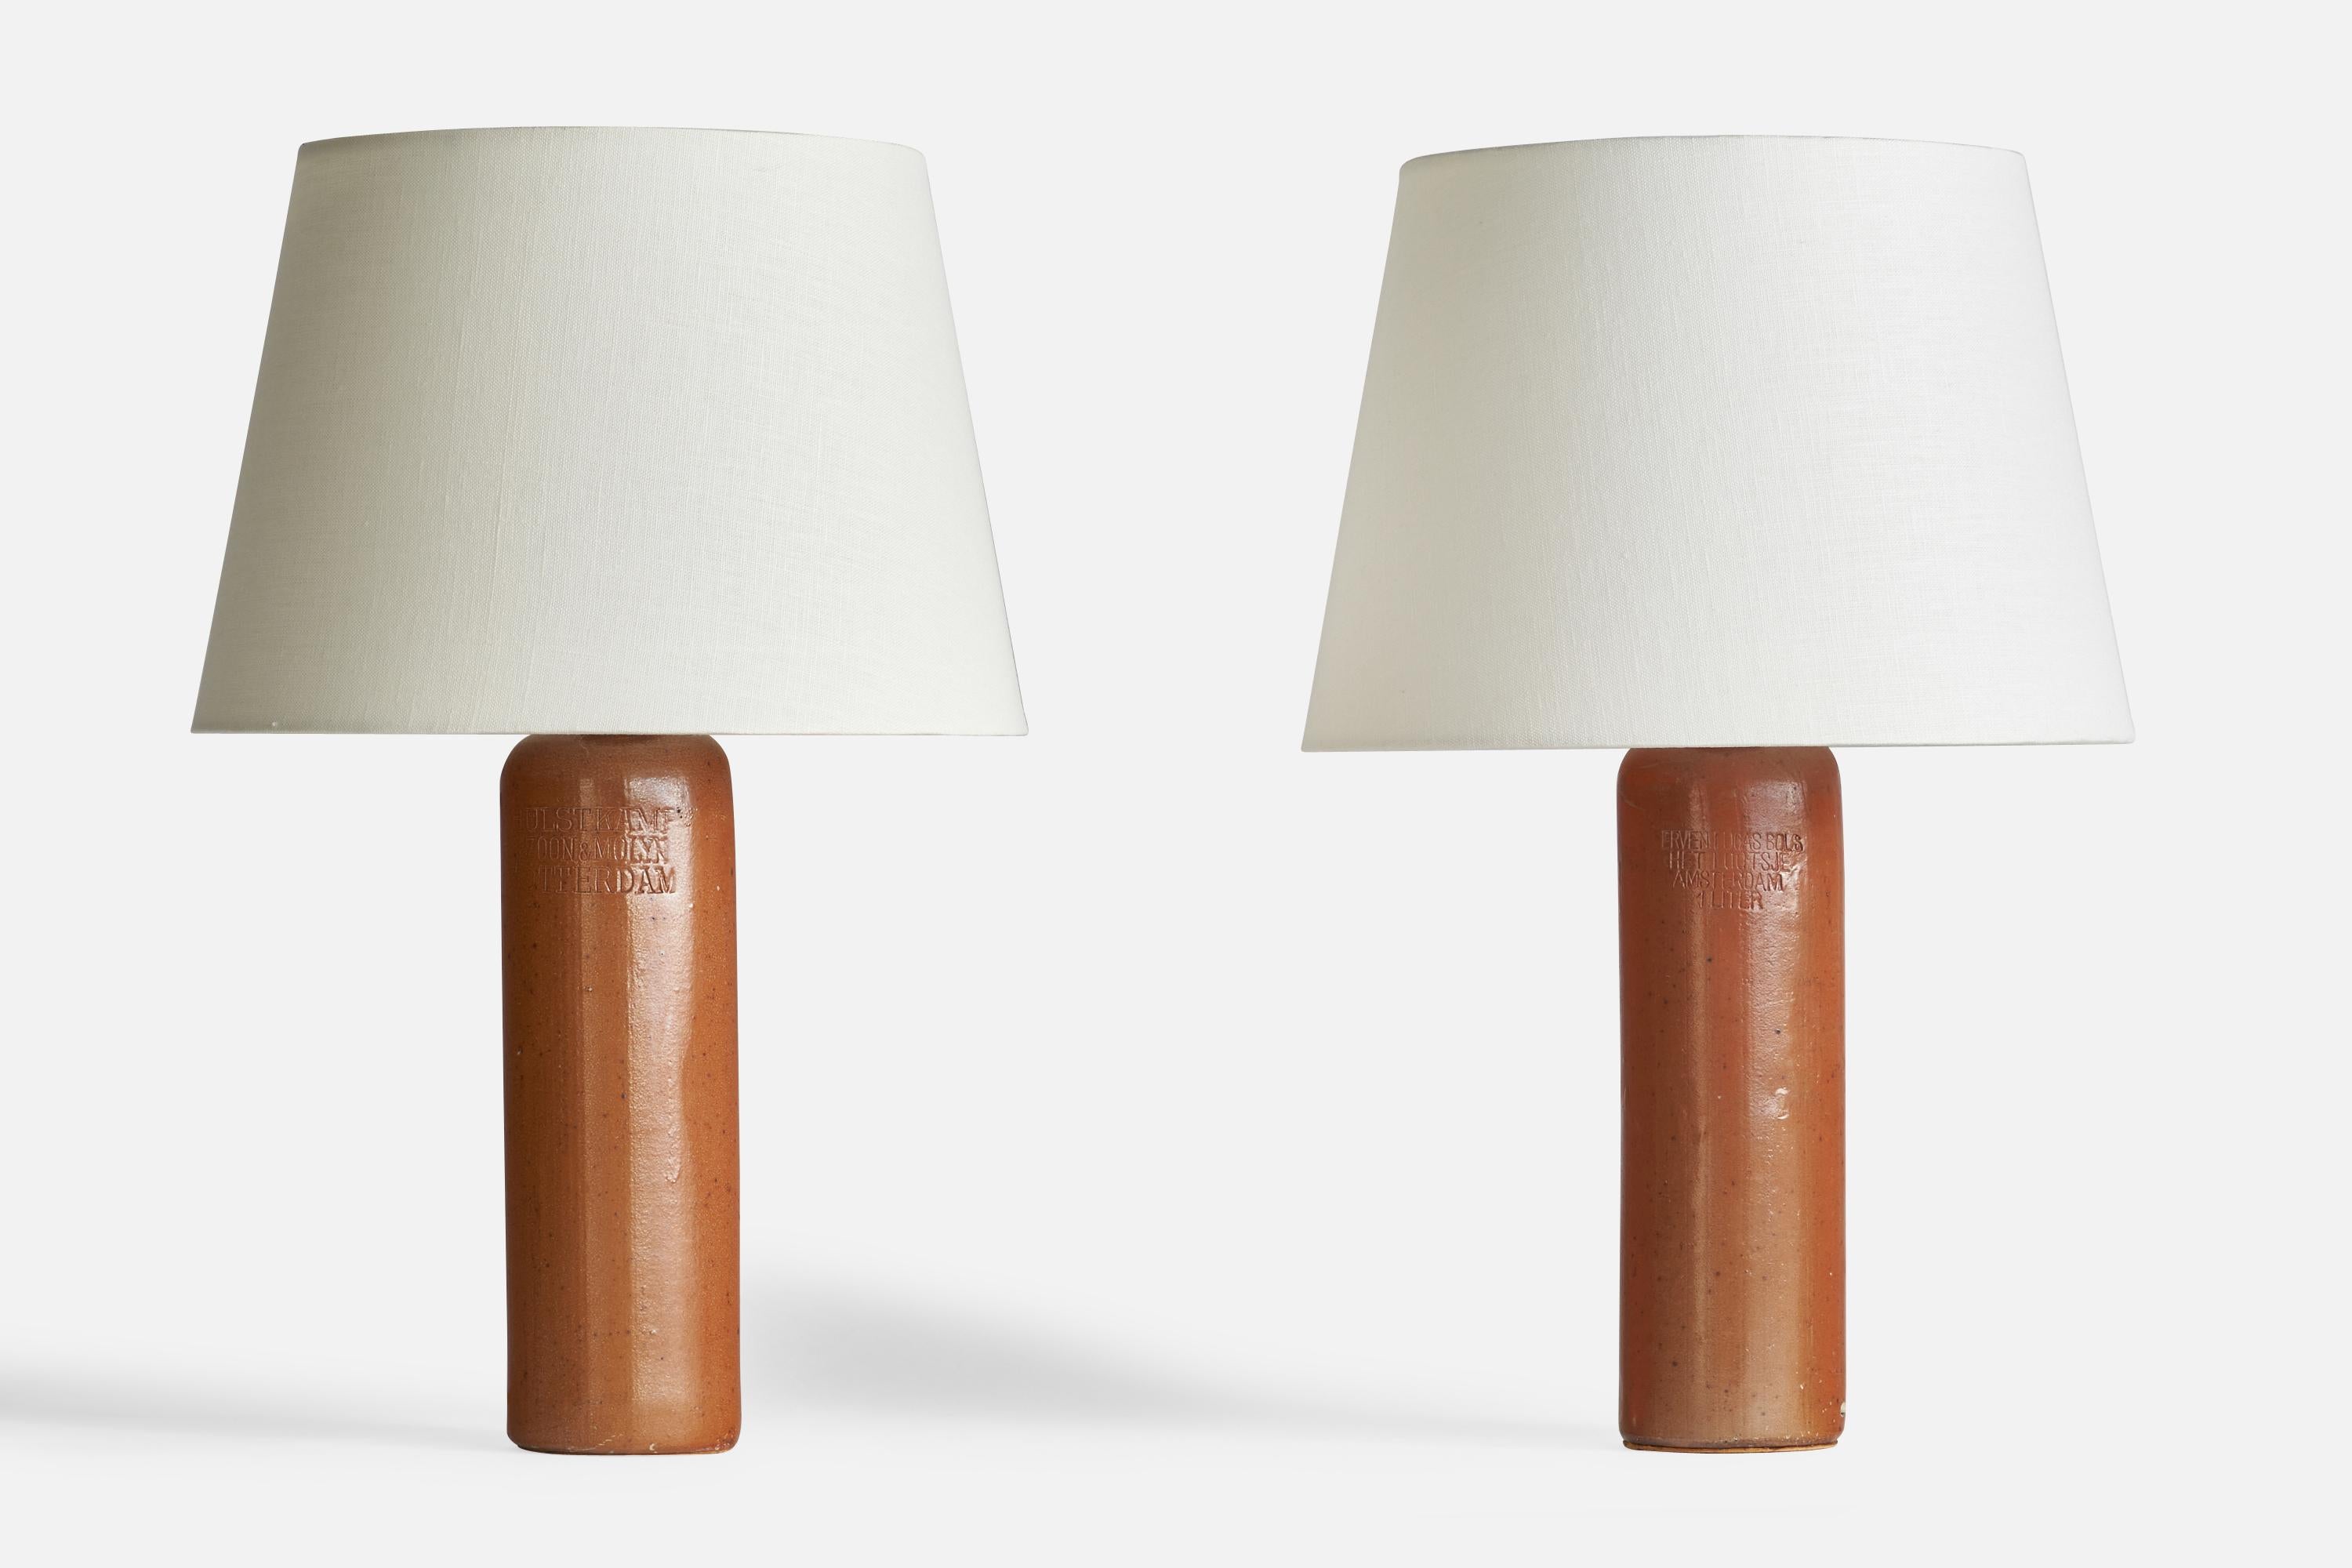 A pair of table lamps produced in Sweden mounted on repurposed Belgian ceramic bottles. 

Dimensions of Lamp (inches): 13.75” H x 3.3” Diameter
Dimensions of Shade (inches): 9” Top Diameter x 12” Bottom Diameter x 9” H
Dimensions of Lamp with Shade